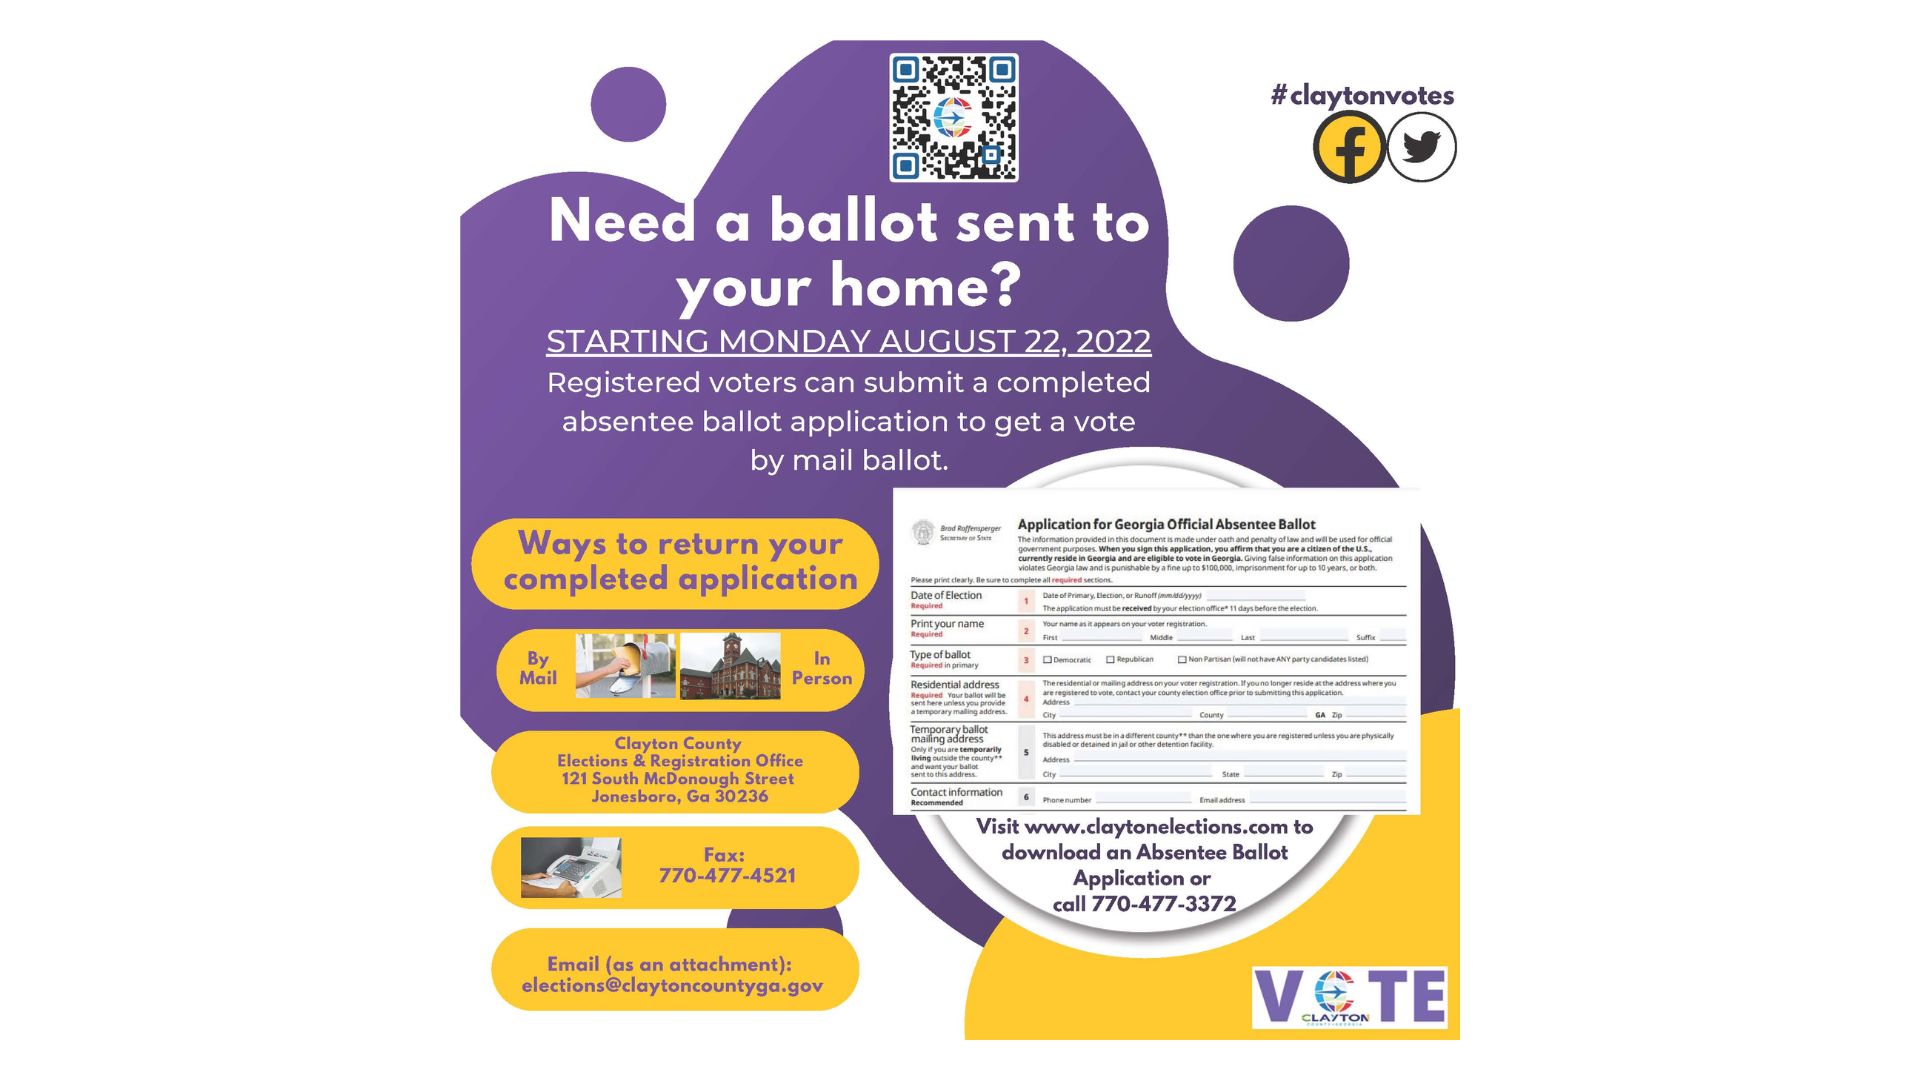 Need a ballot sent to your home?